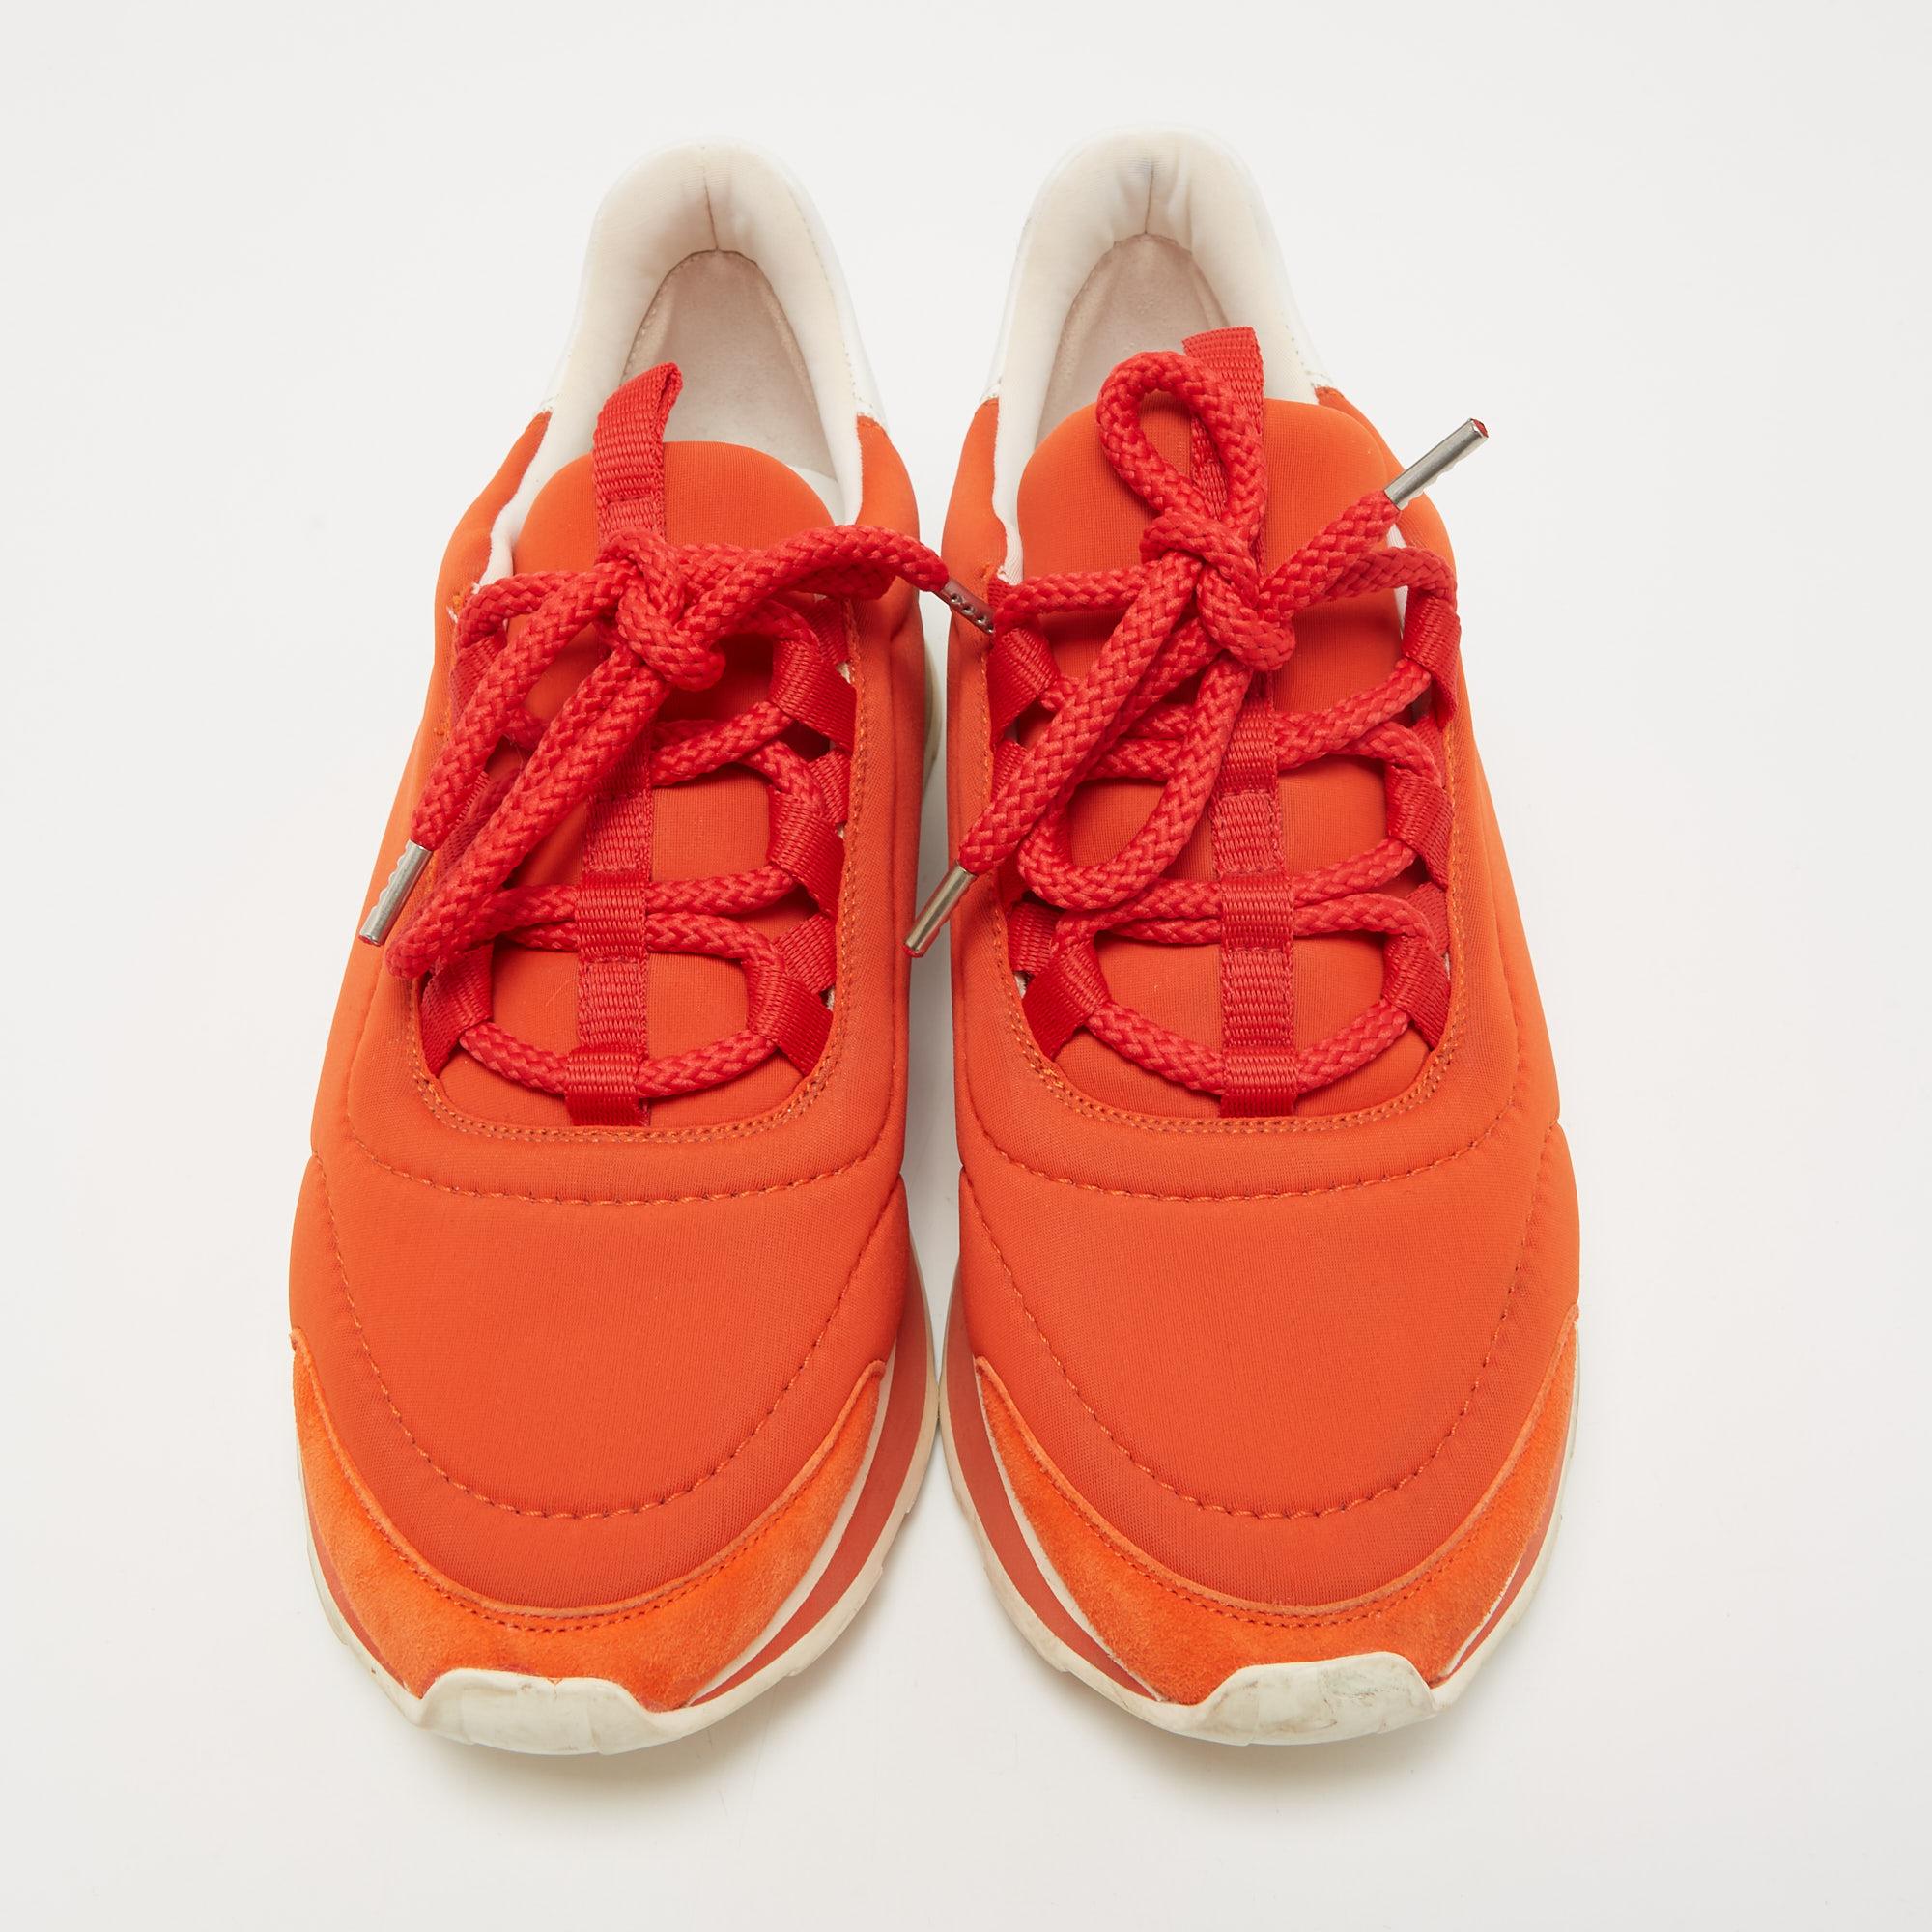 Hermes Orange/White Nylon and Leather Buster Sneakers Size 37.5 1